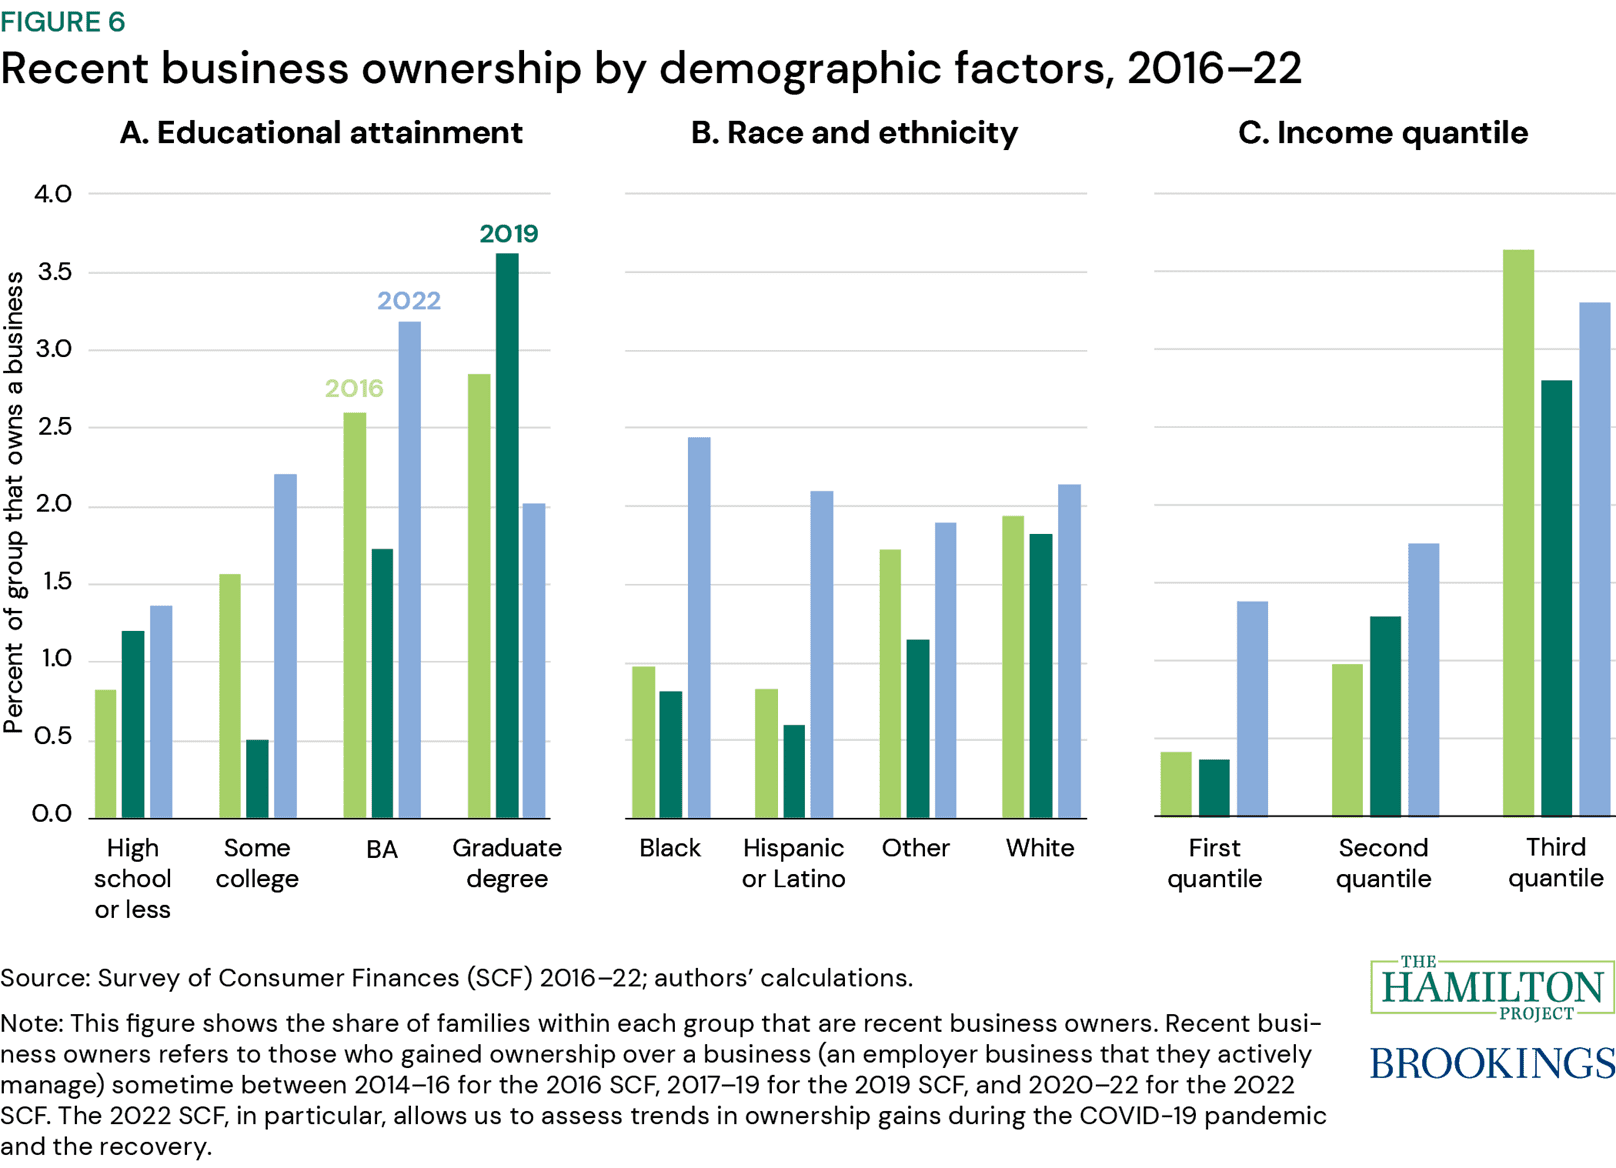 Figure 6: Recent business ownership by demographic factors, 2016-22. Figure 6 shows the share of each group who gained ownership over the past three years prior to and including each survey year.